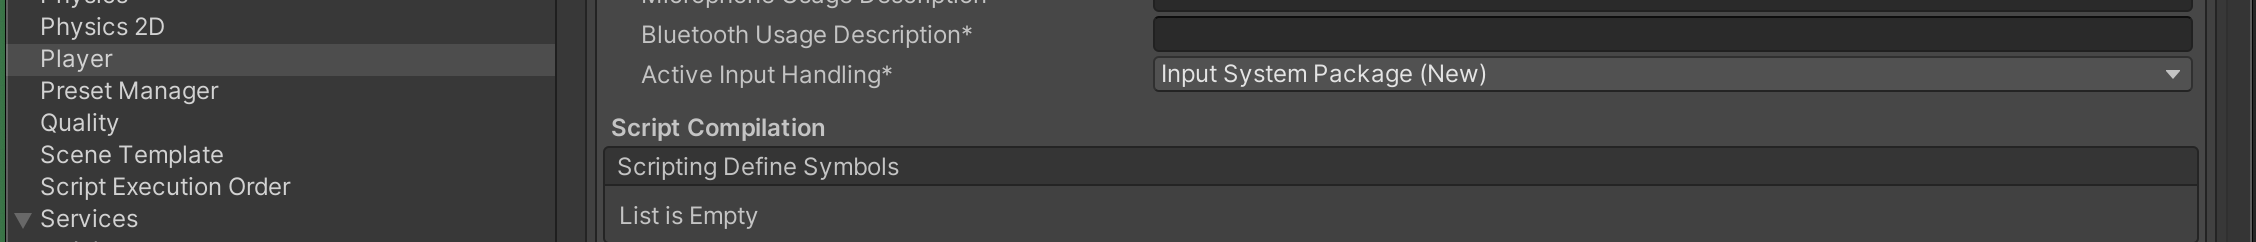 show Project Settings with new input system switched on